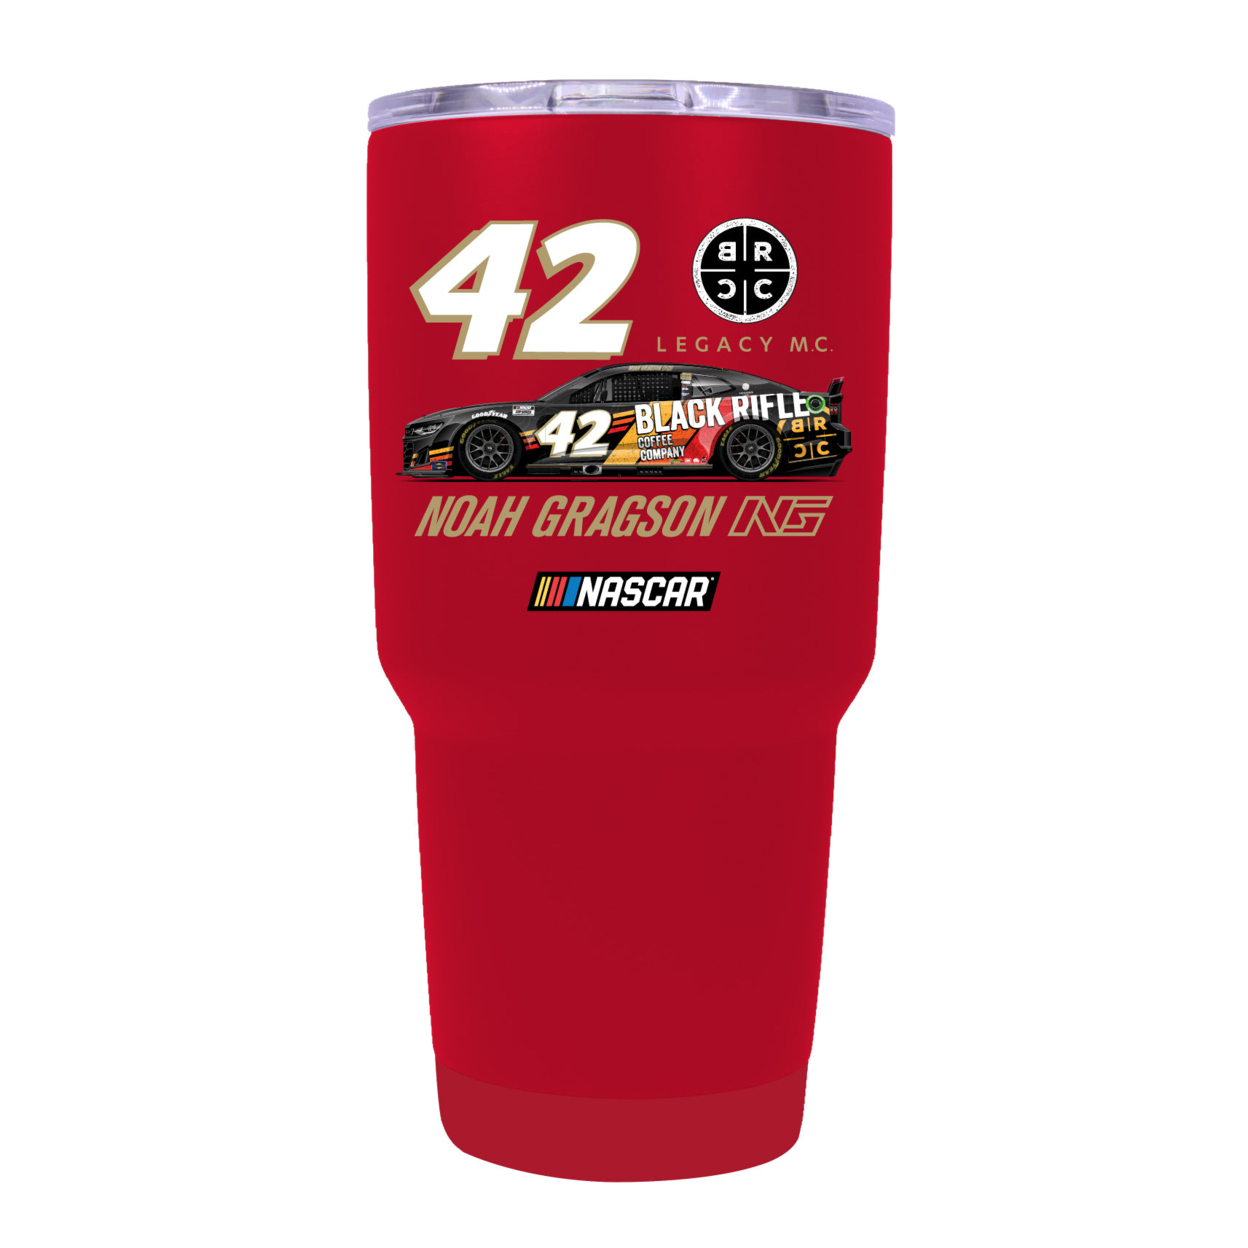 #42 Noah Gragson BRCC Officially Licensed 24oz Stainless Steel Tumbler - Red